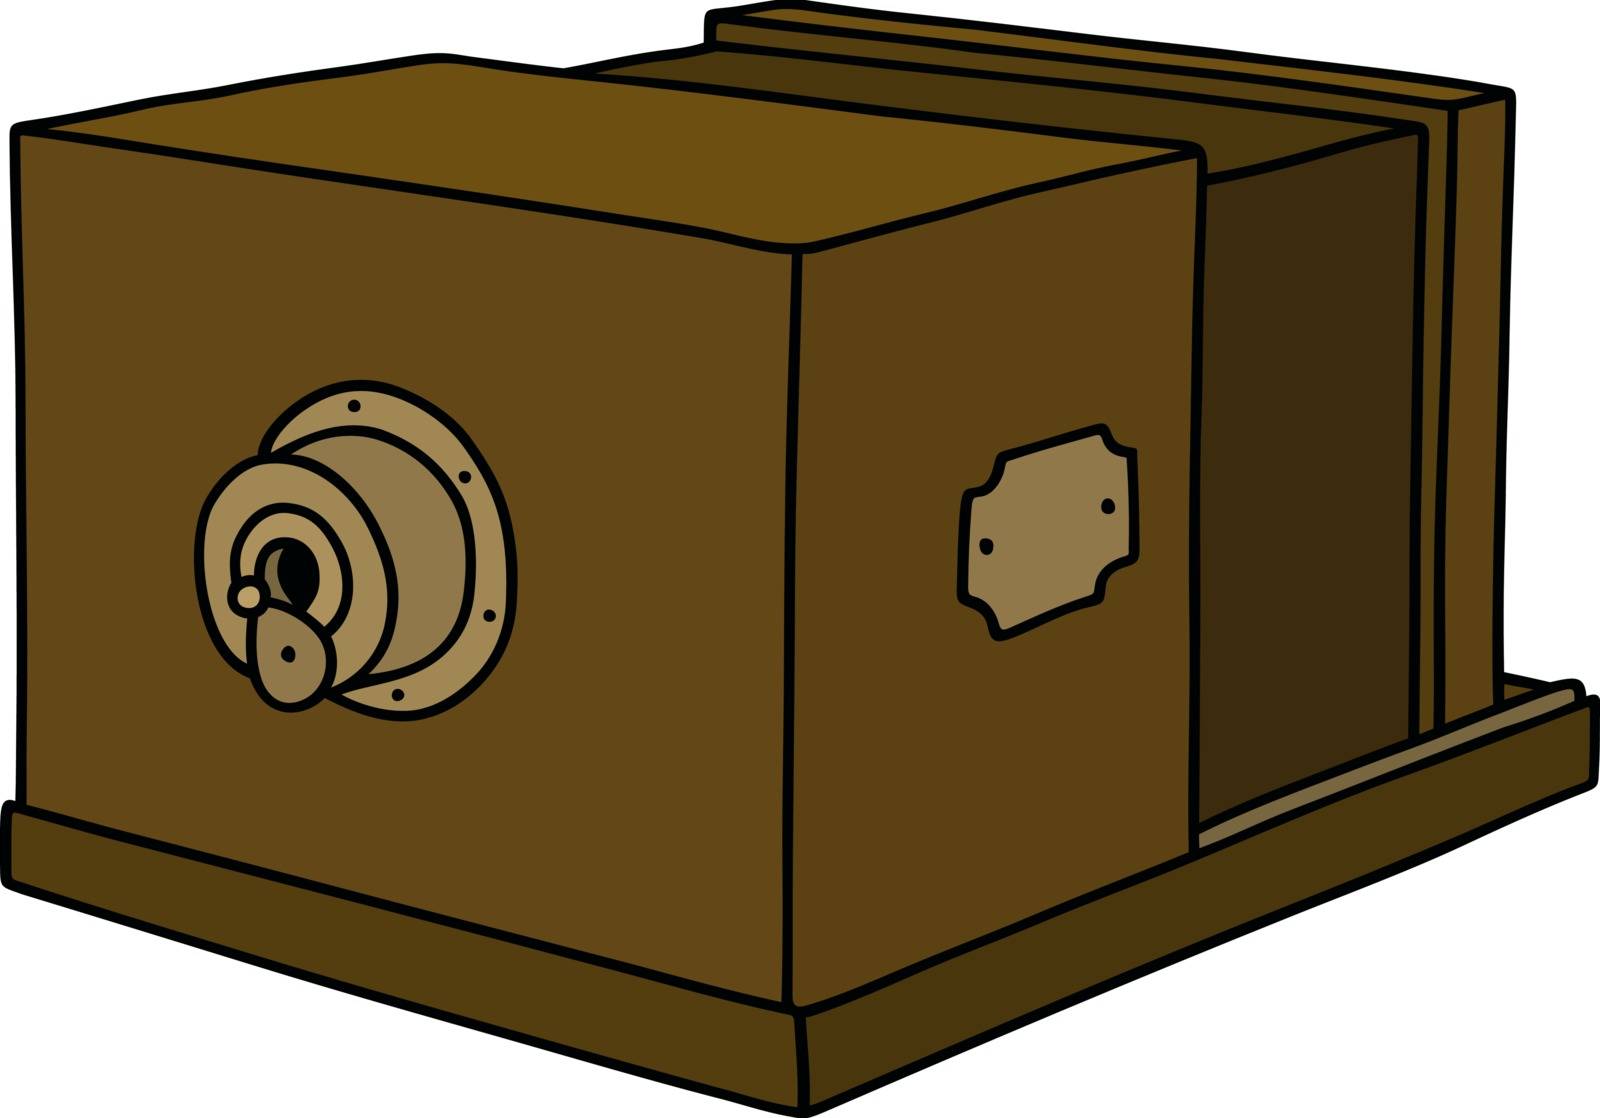 Hand drawing of an antique wooden photographic camera